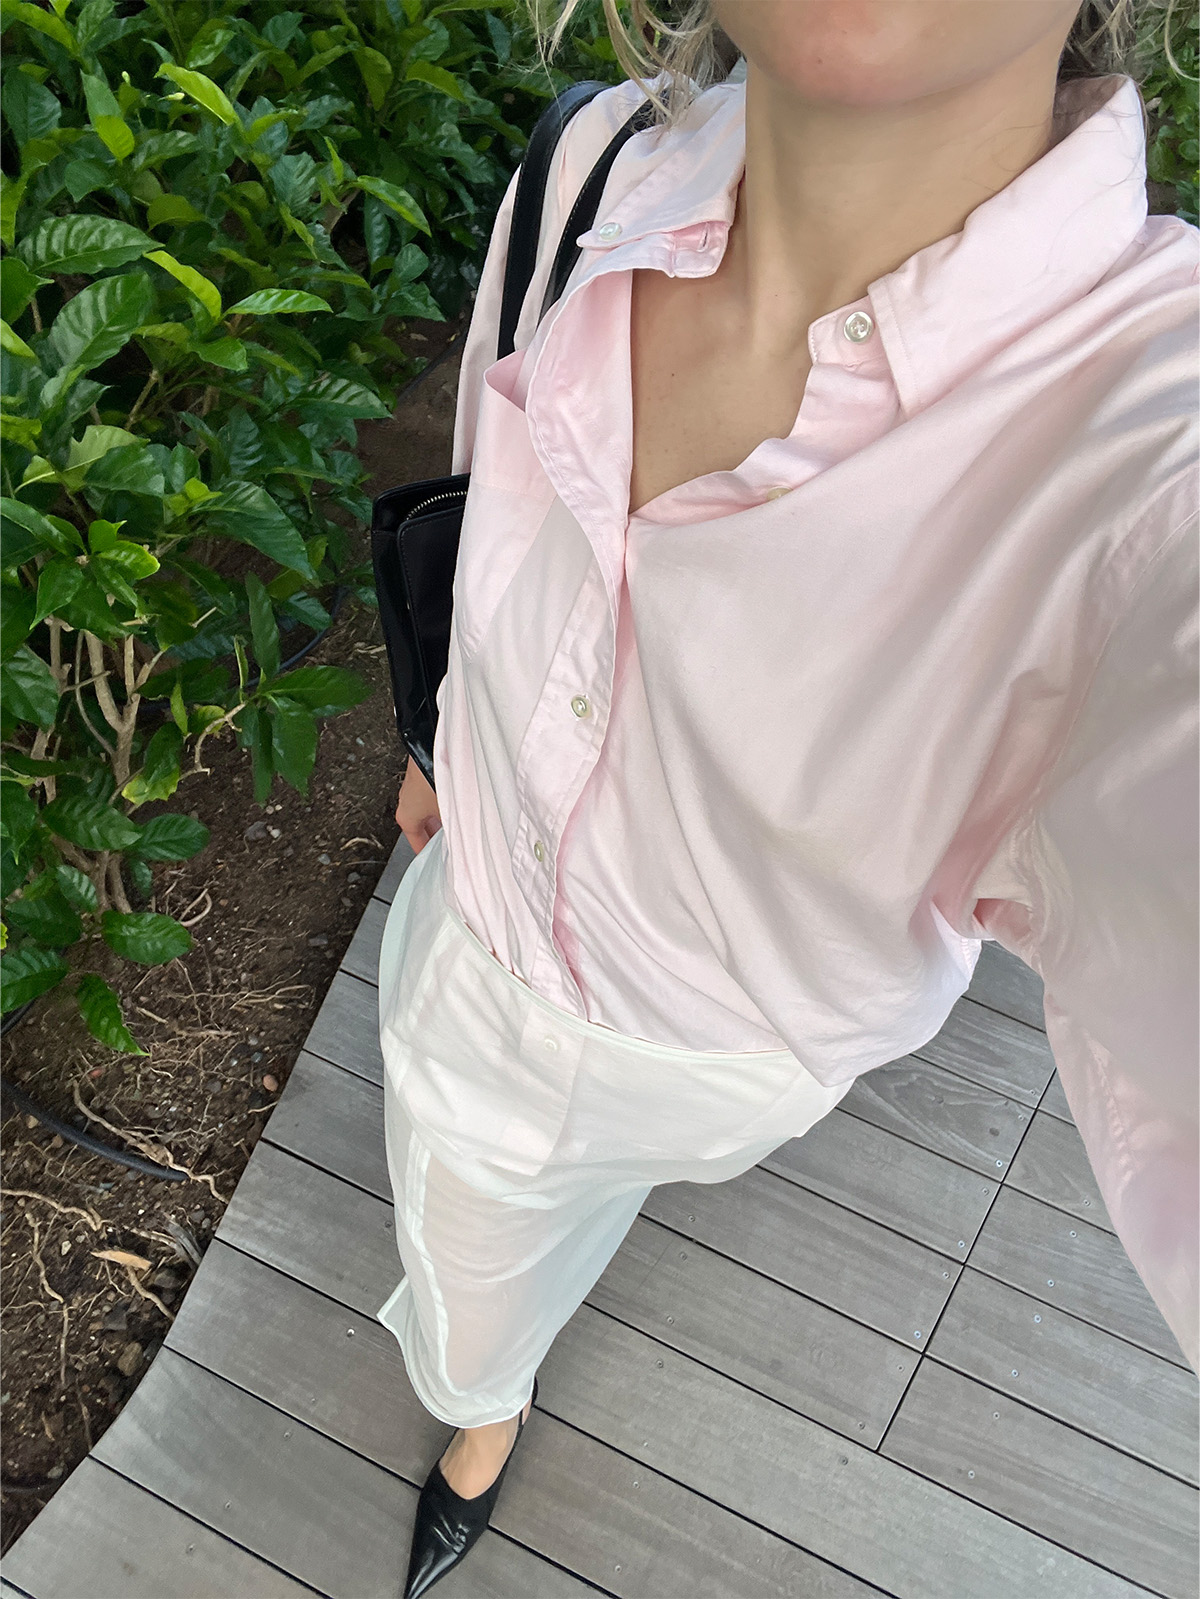 Eliza Huber wearing a pink button-down shirt and sheer white skirt.